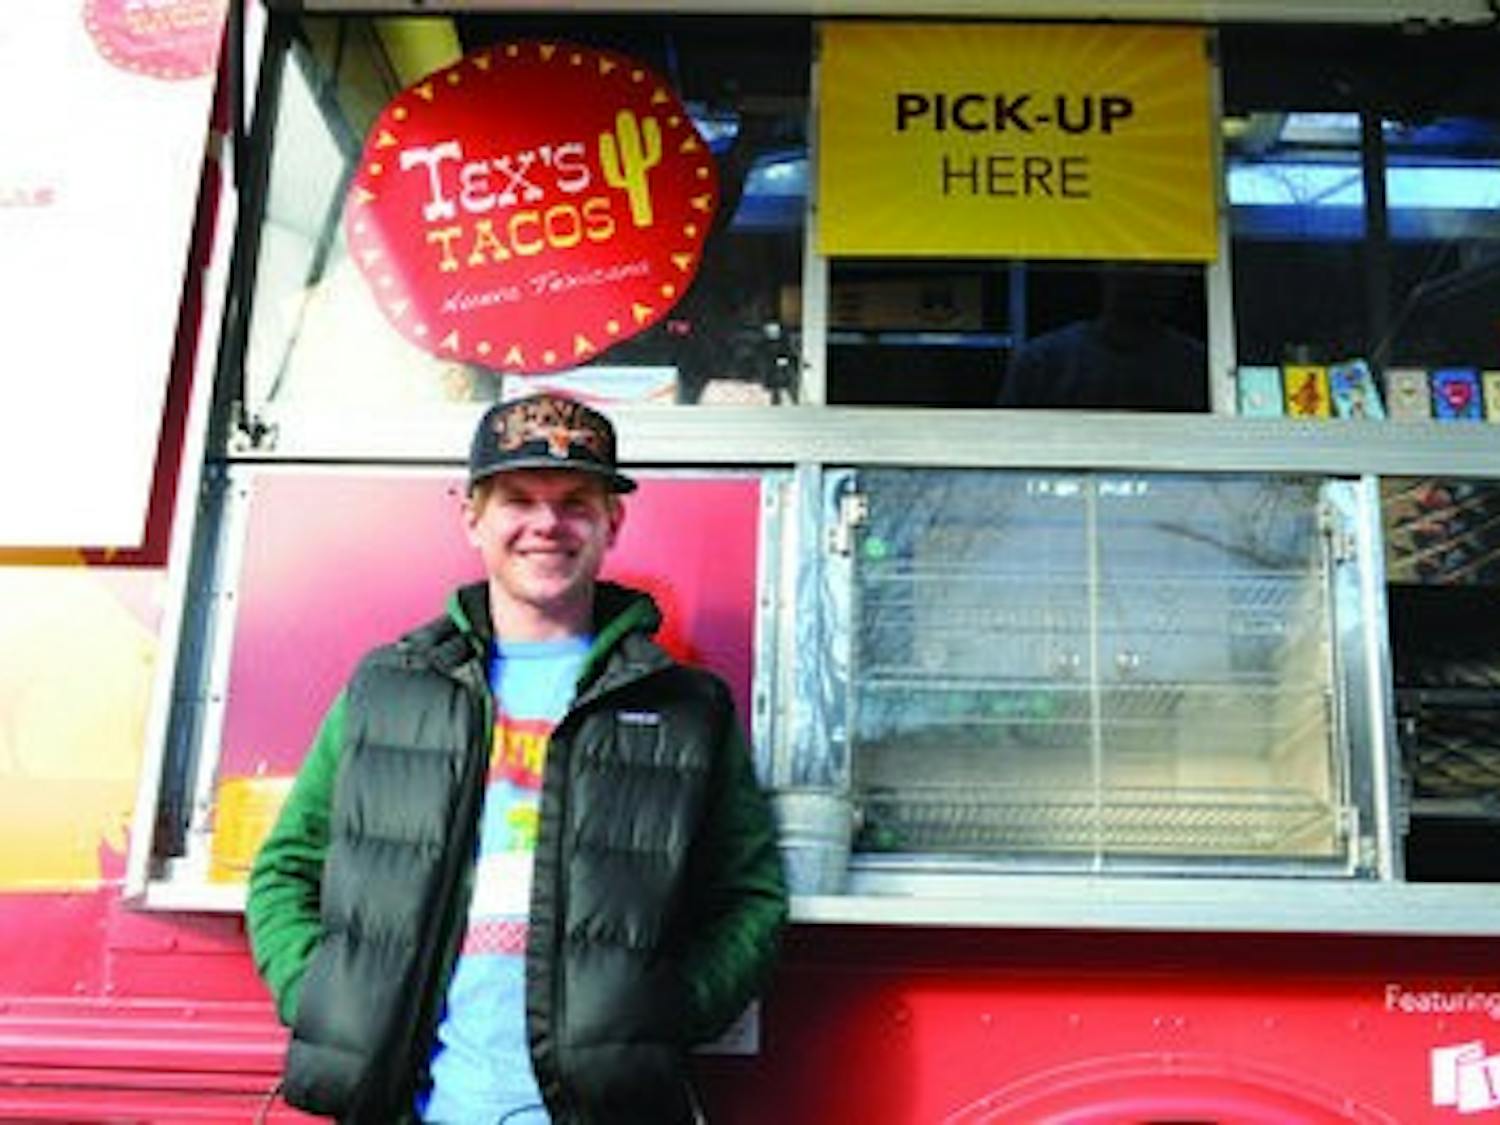 Mac Helms started Tex's Tacos with his business partner Harrison Jones in April 2011 with no prior experience in the food industry. (Christen Harned / ASSISTANT PHOTO EDITOR)